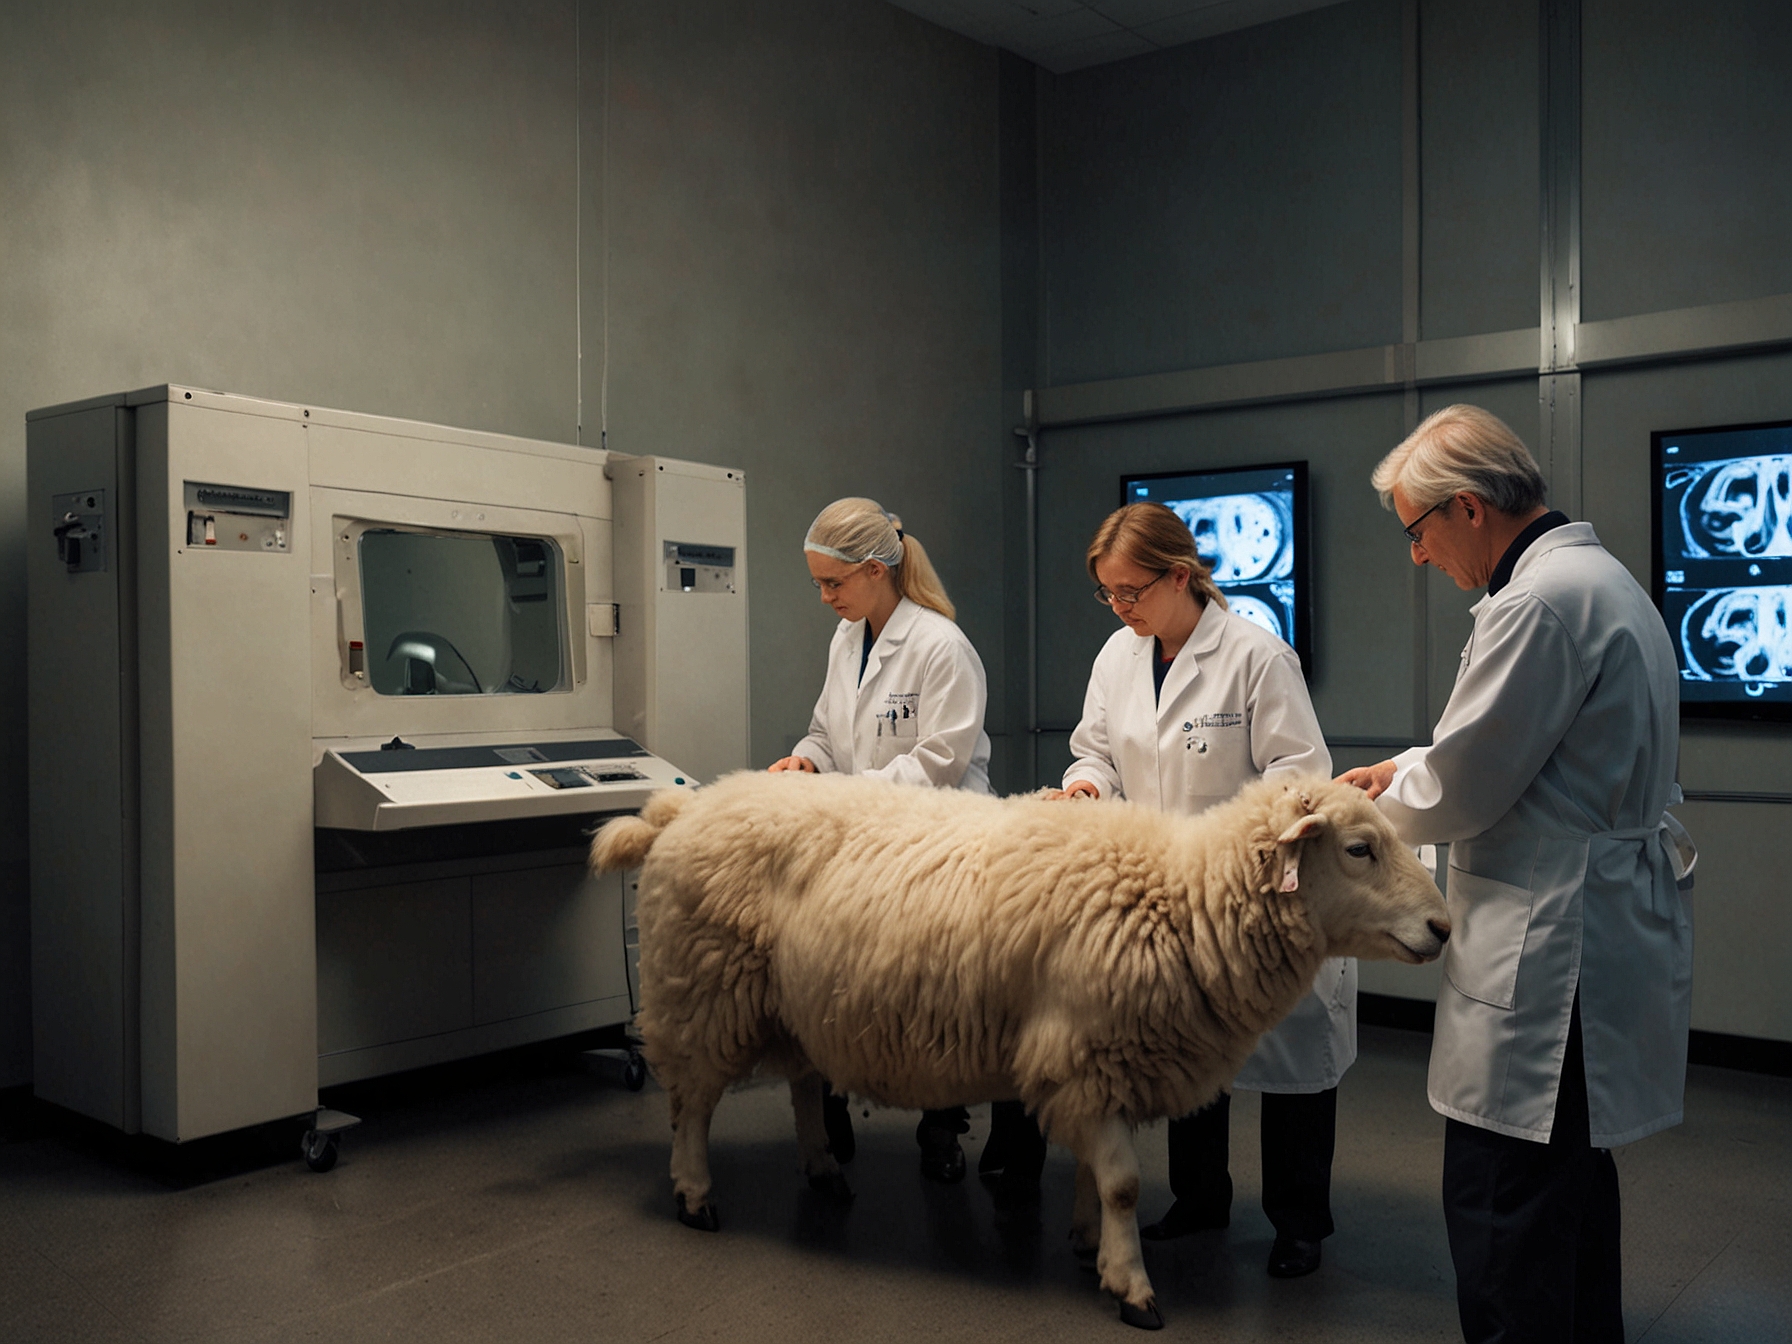 Researchers using positive reinforcement techniques, such as treats and gentle handling, to train sheep to stay calm and still during MRI procedures, enhancing data accuracy.